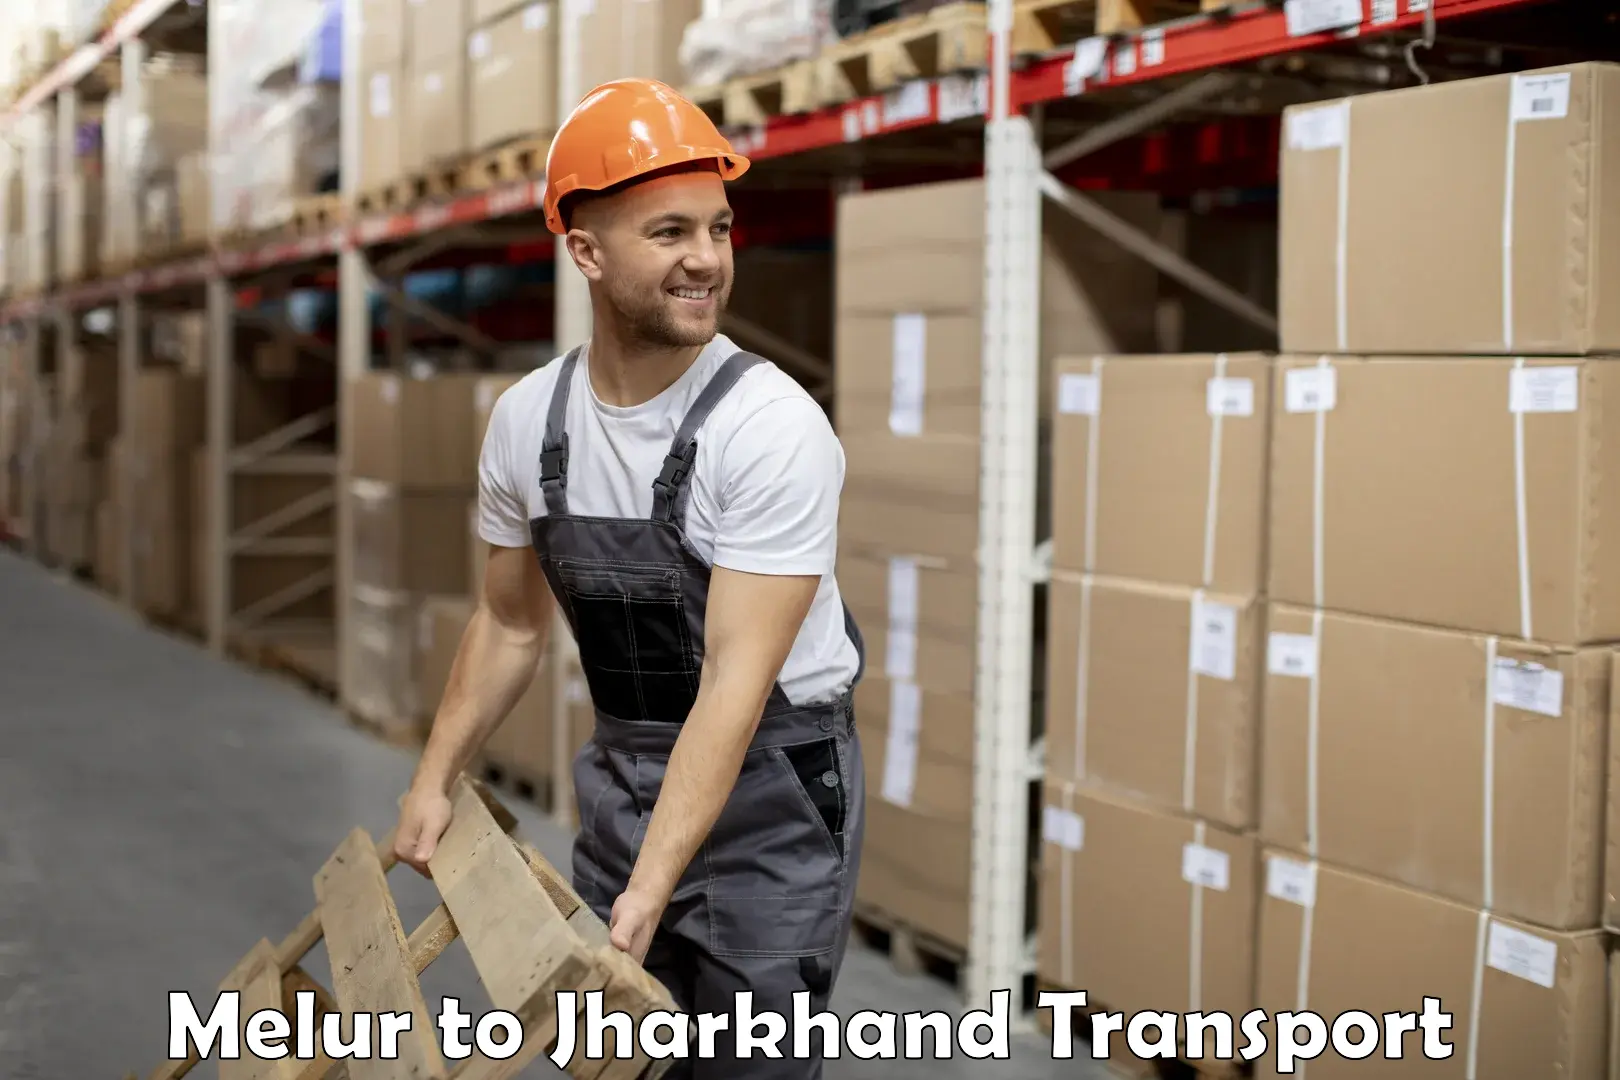 Container transport service Melur to Jharkhand